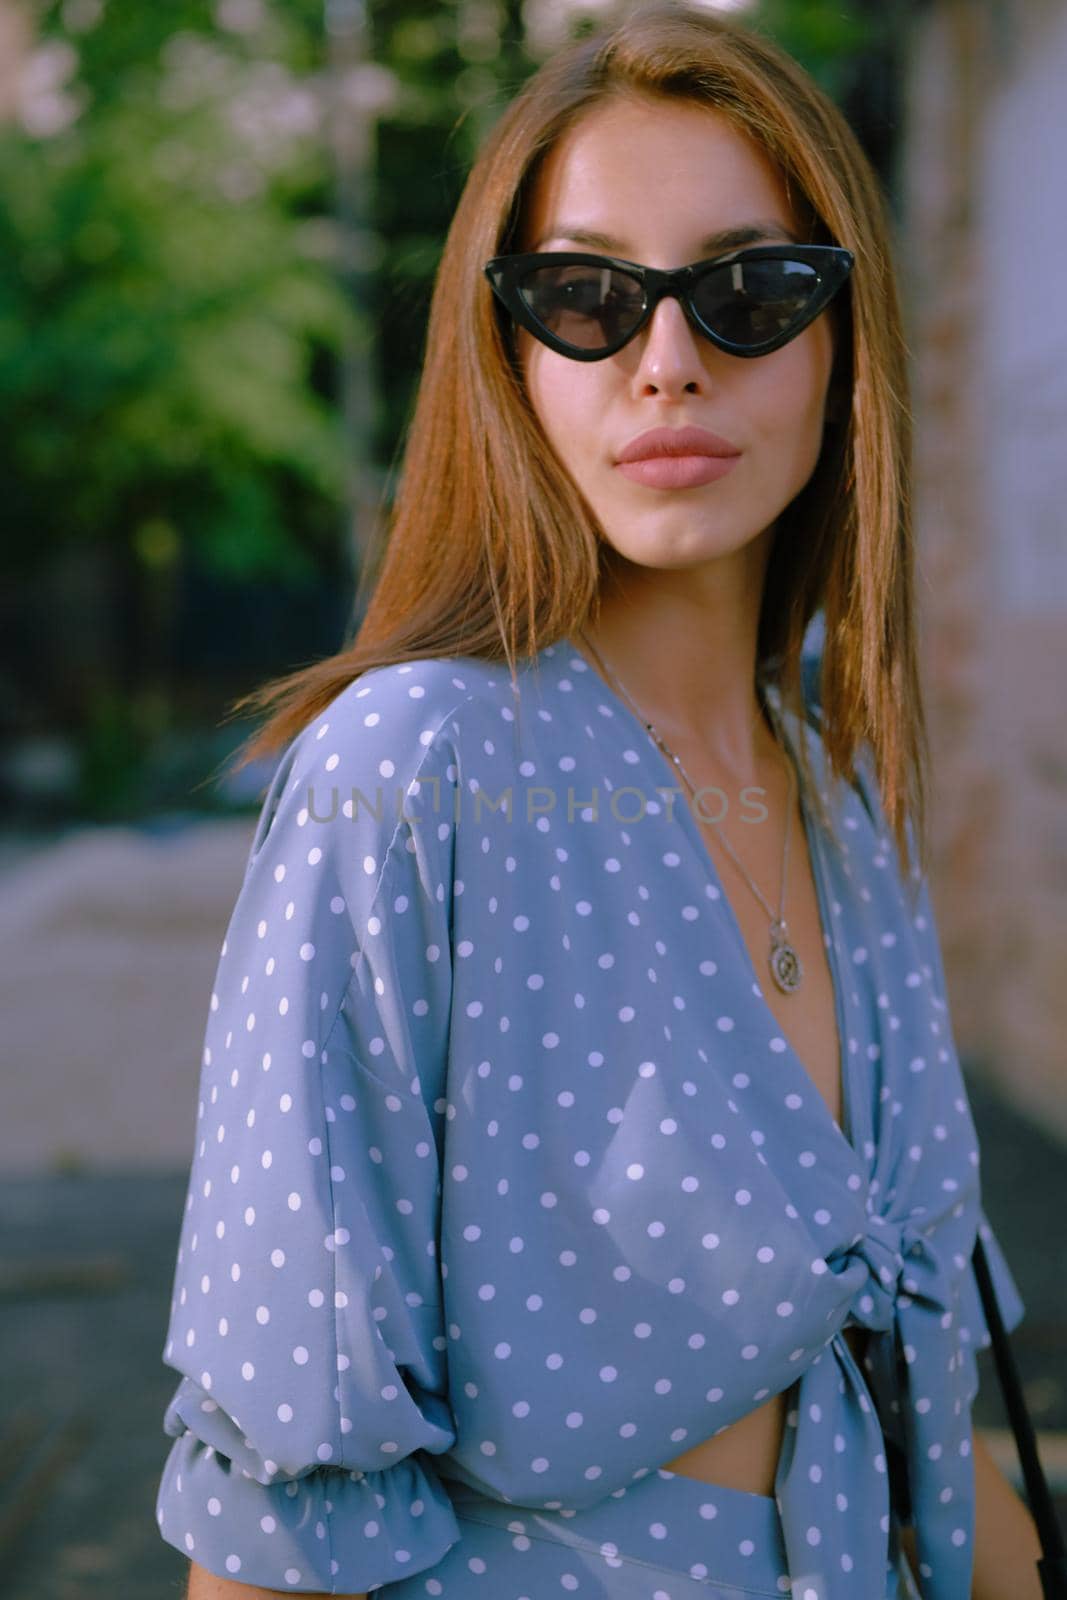 Charming blonde woman in a long blue dress with polka-dots, watch, sunglasses, with a pendant around her neck and a small black handbag on her shoulder is walking alone in the city. The concept of fashion and style. Close-up shot.